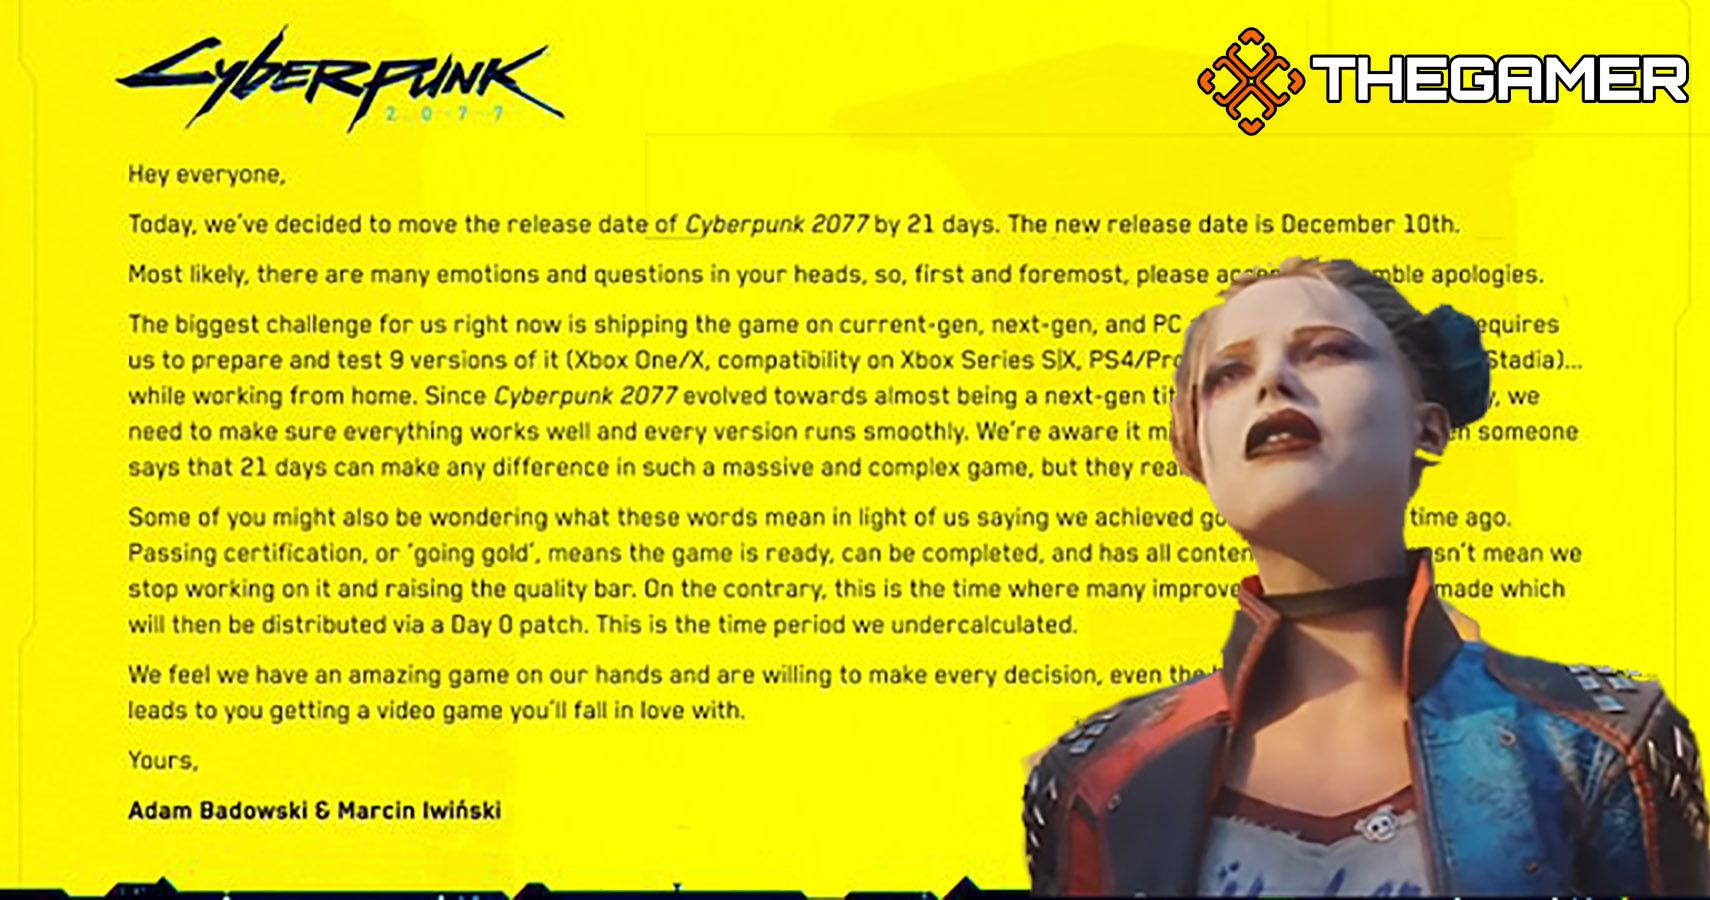 CDPR's announcement that Cyberpunk 2077 would be delayed until December 10